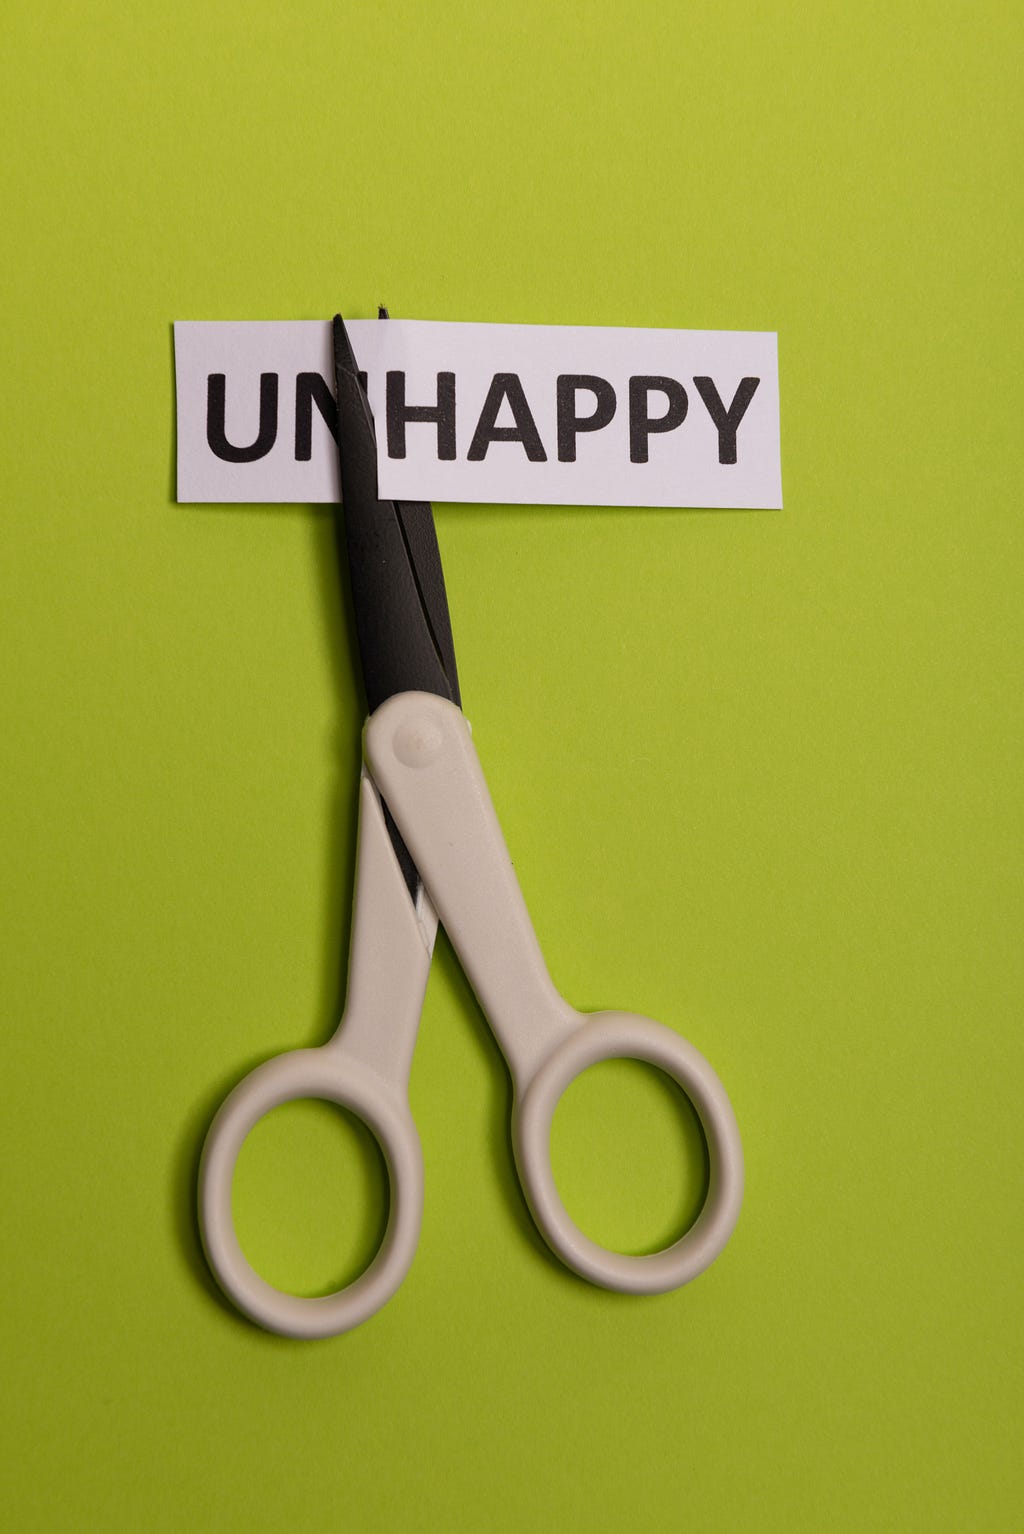 A pair of scissors cutting the word “unhappy”